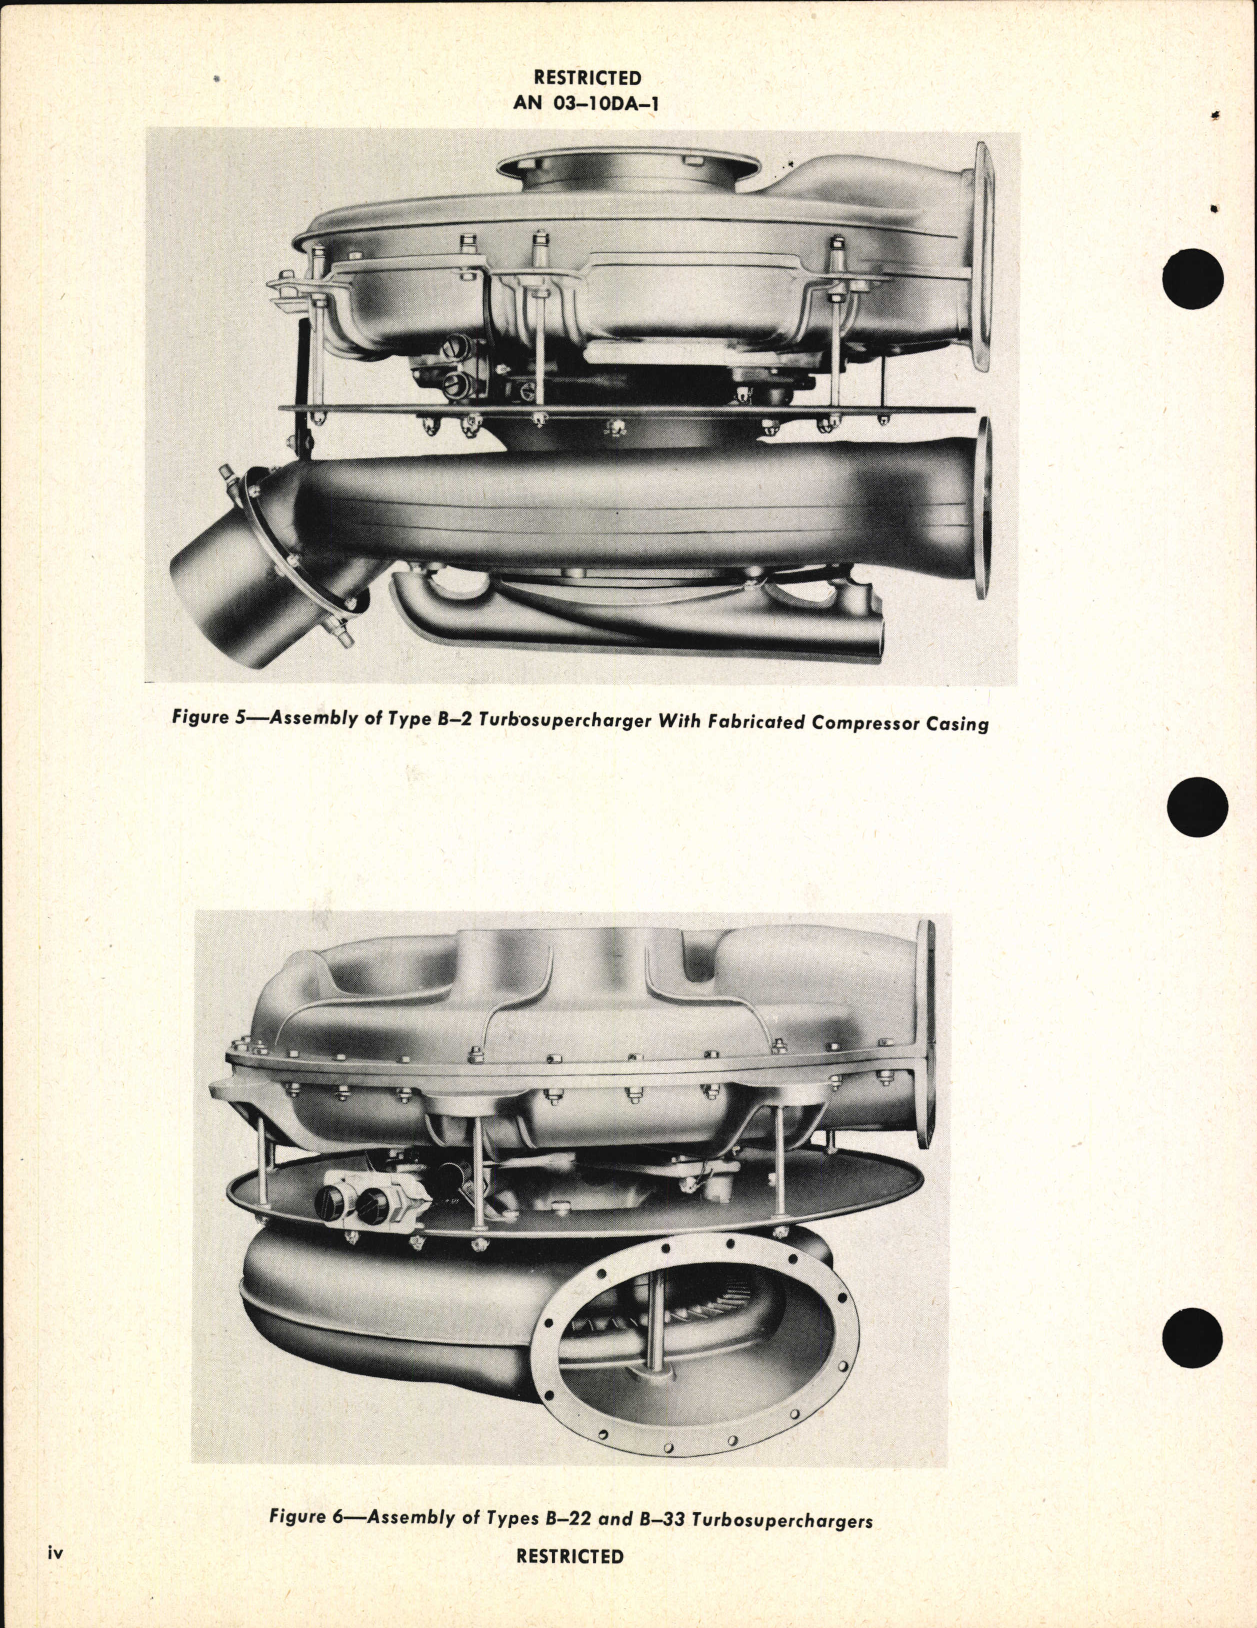 Sample page 6 from AirCorps Library document: Operation, Service, & Overhaul Instructions with Parts Catalog for Turbosuperchargers Types B-2, B-11, B-22, B-31, and B-33